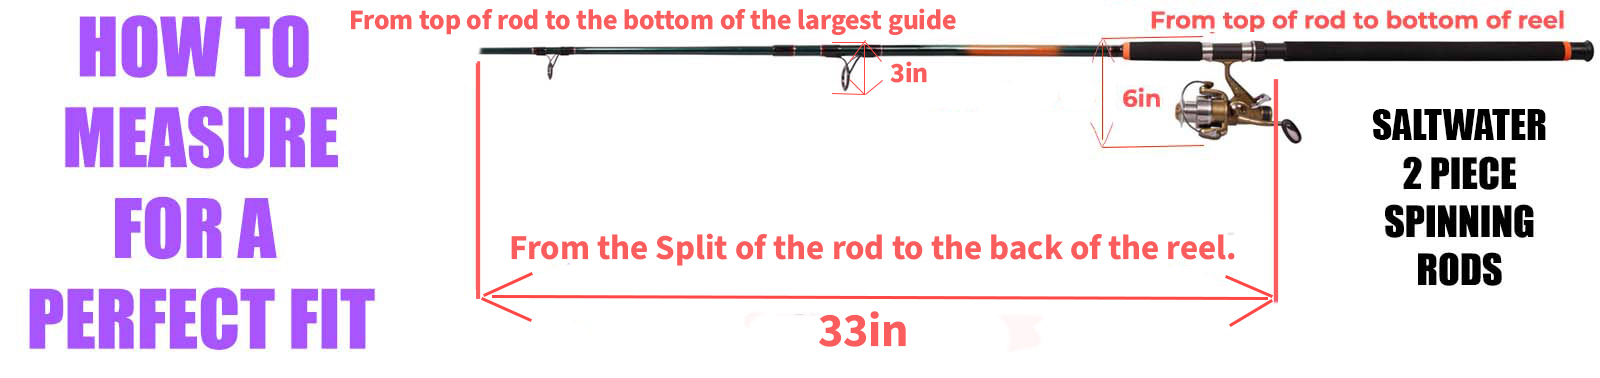 How to measure 2 piece saltwater spinning rod